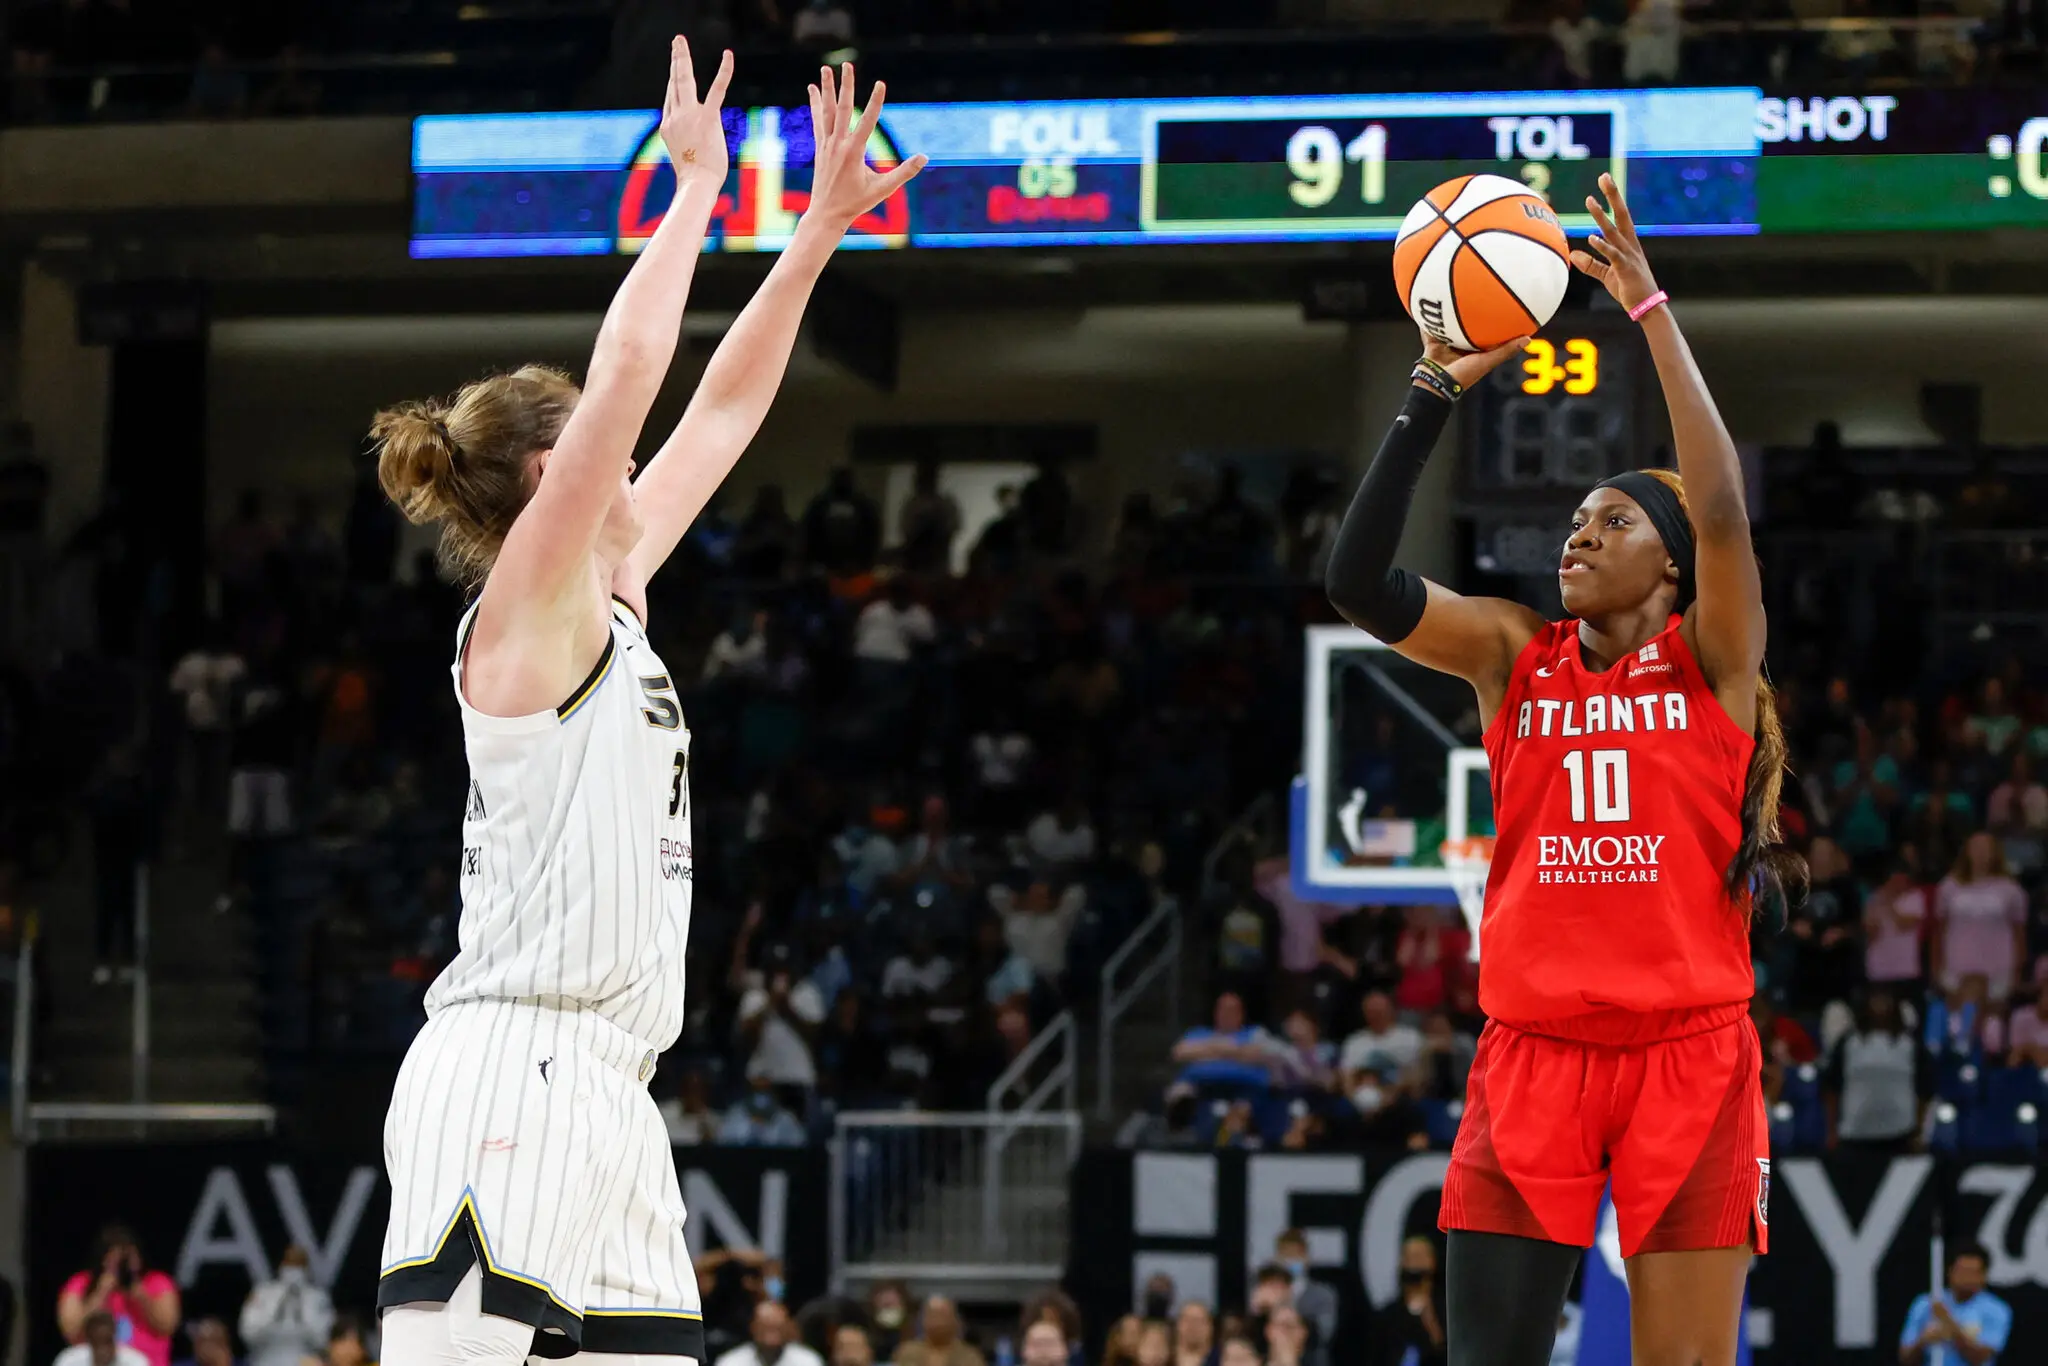 The Dream traded up to draft Rhyne Howard with the No. 1 overall pick this year. So far, it has paid off. She leads all rookies in scoring.